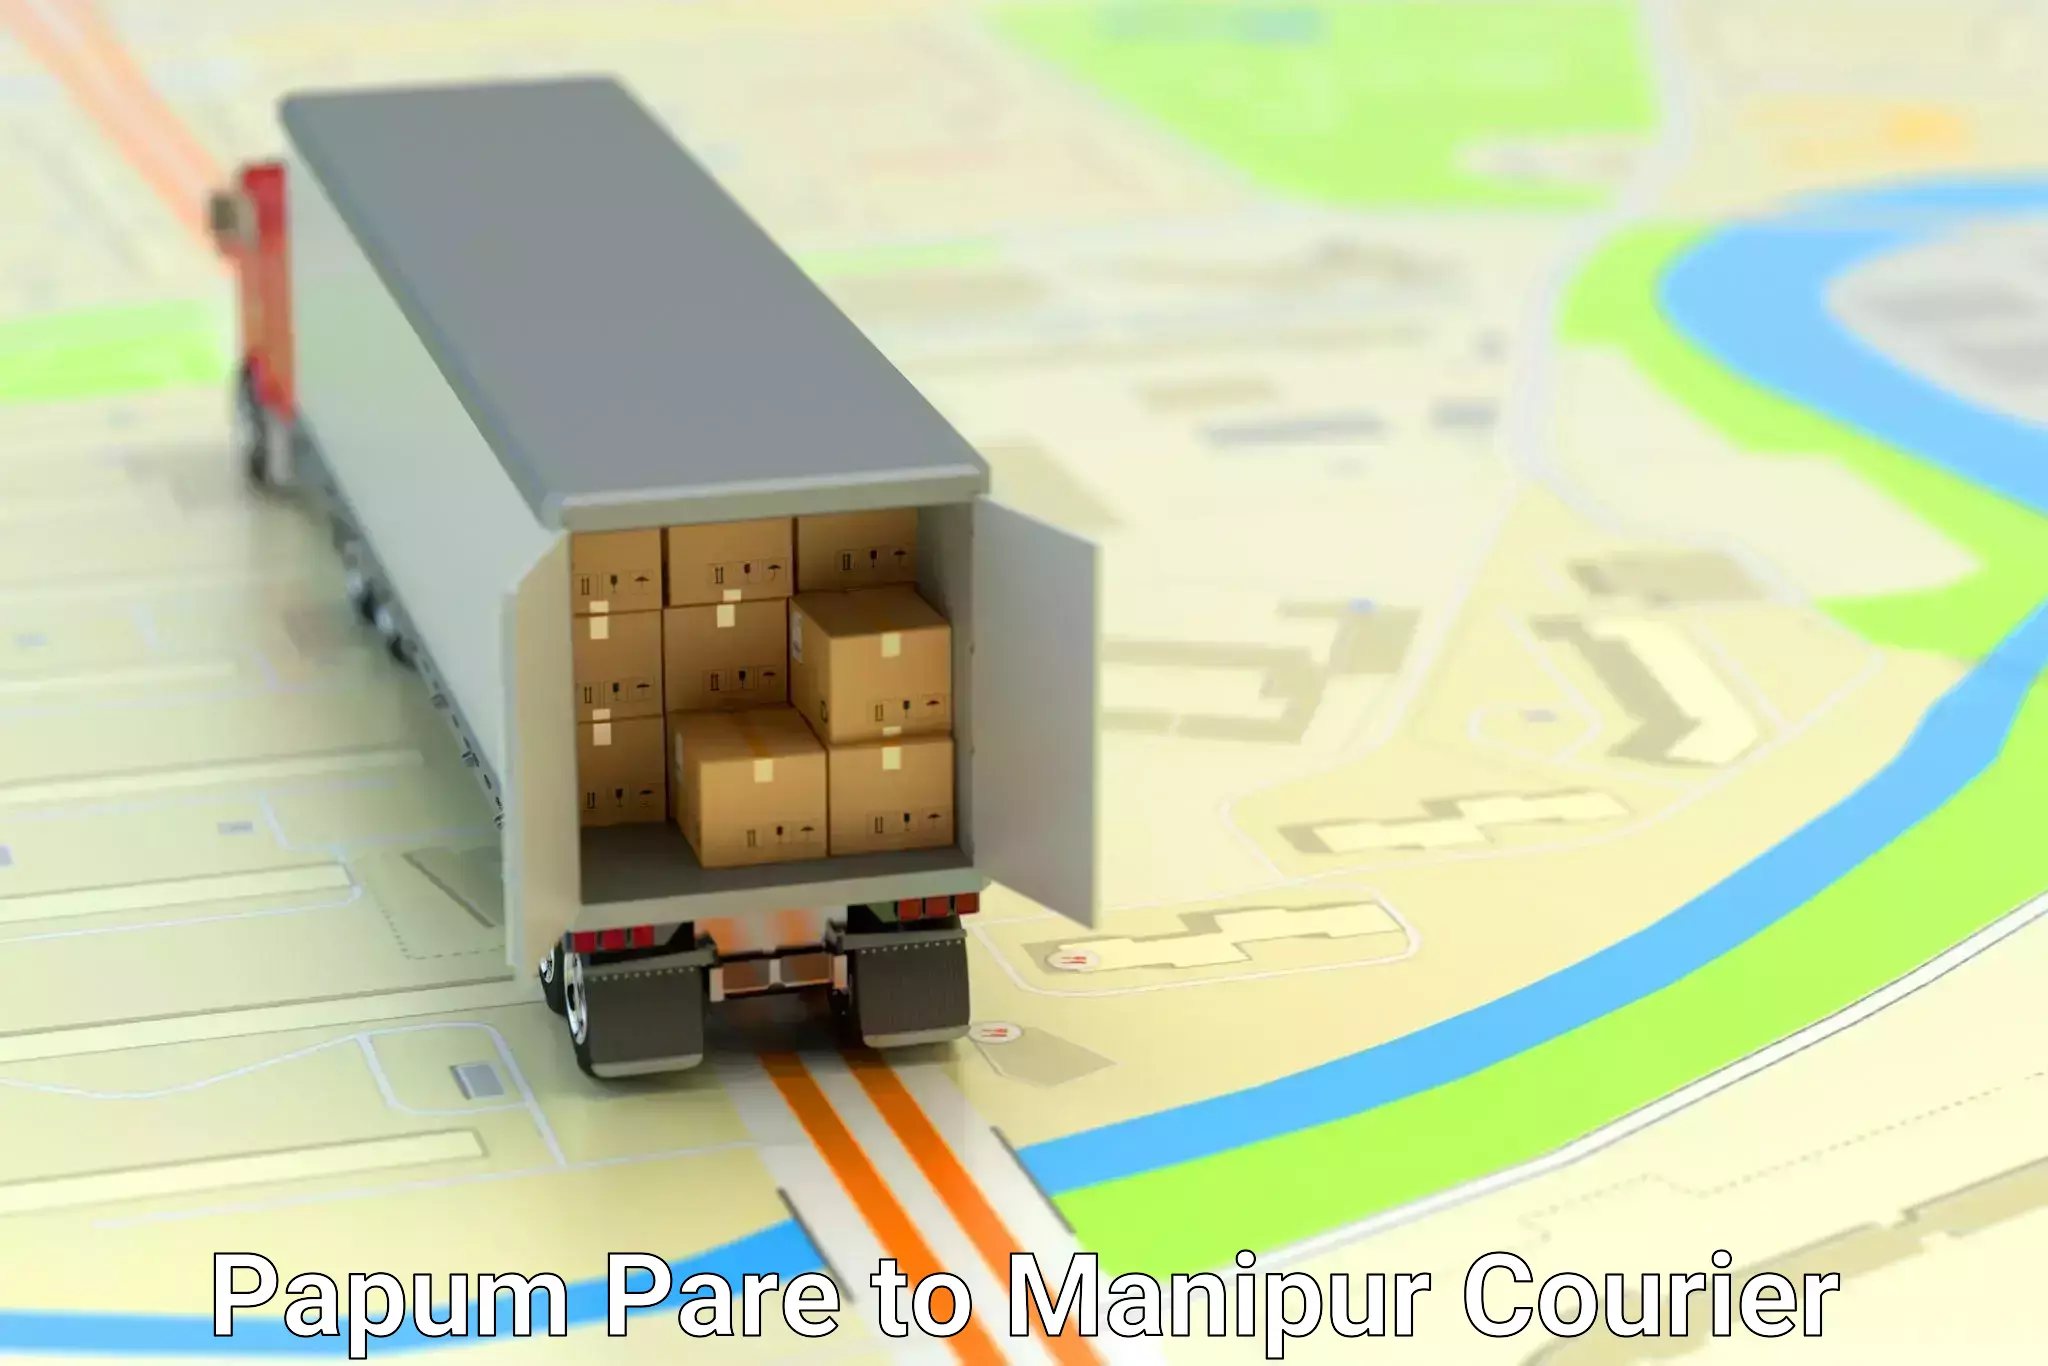 State-of-the-art courier technology in Papum Pare to Manipur